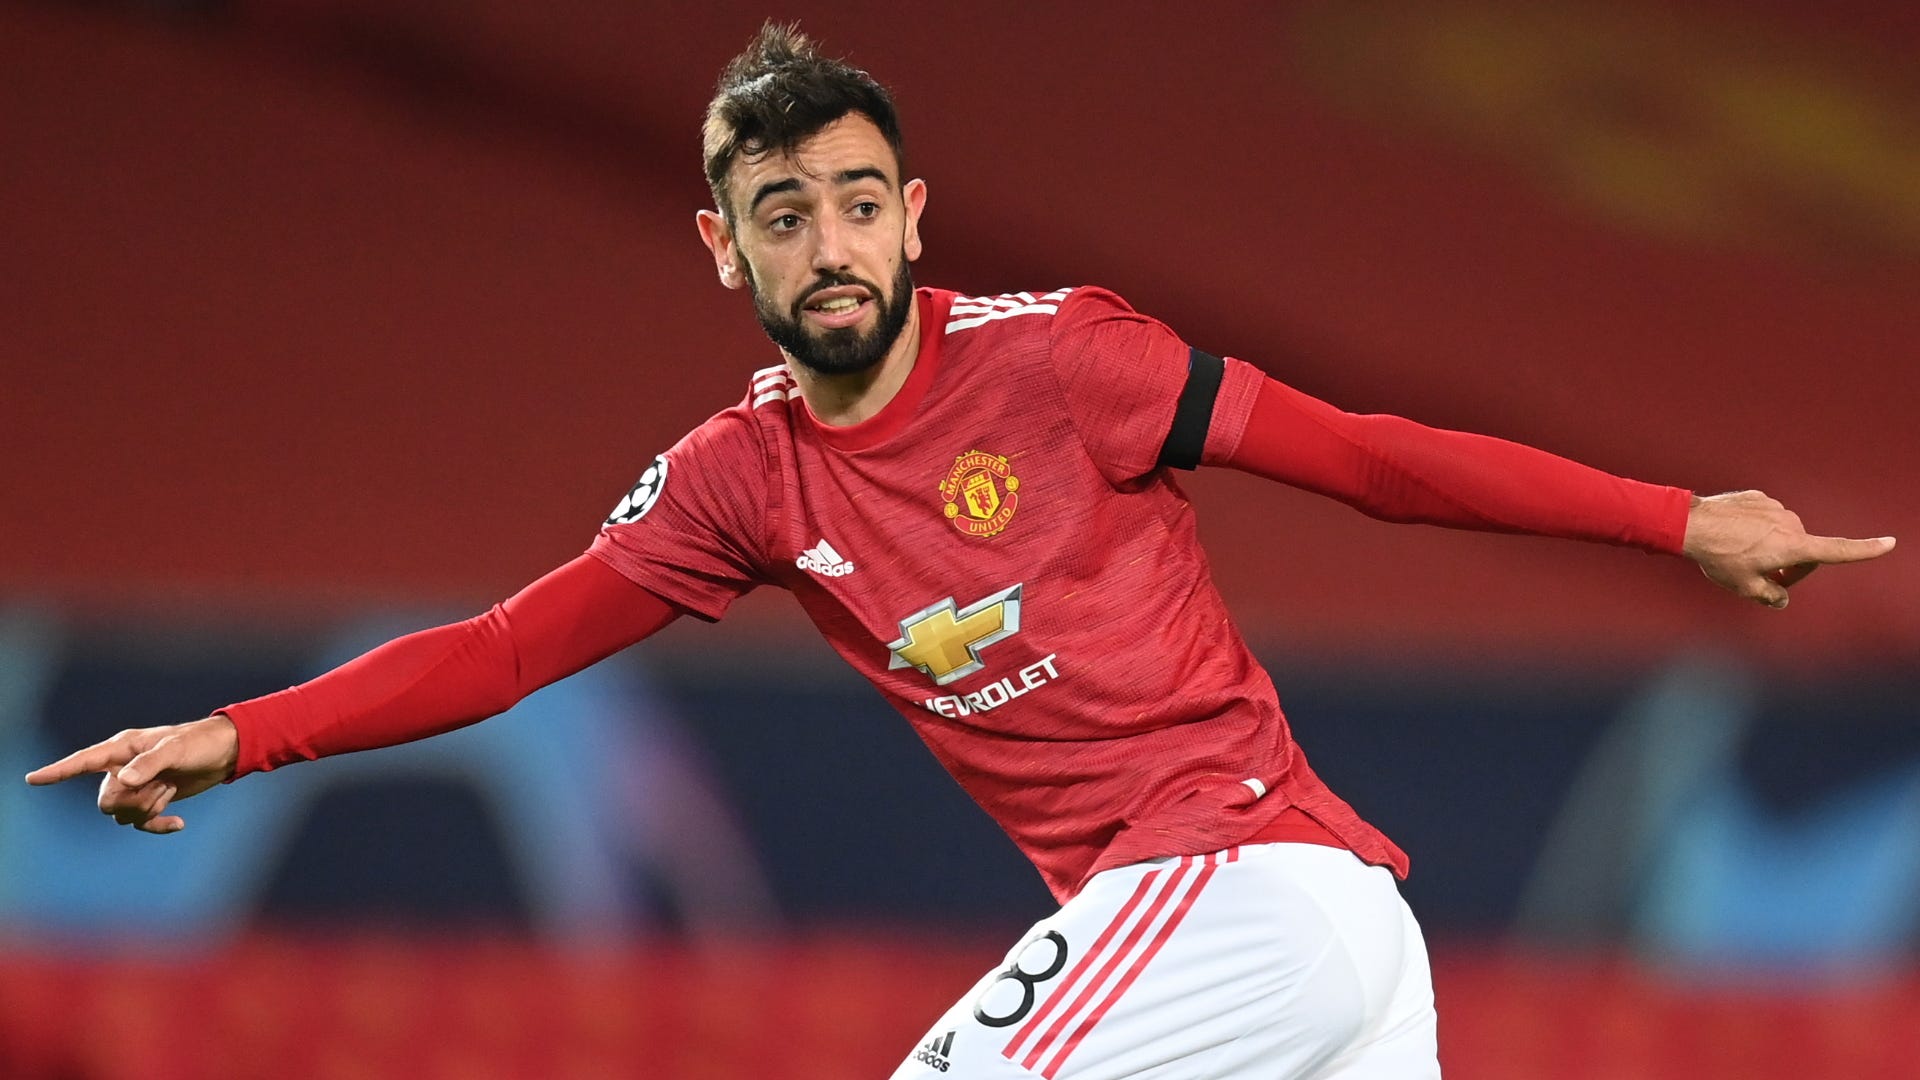 Moutinho plays down Fernandes comparisons and rivalry ahead of